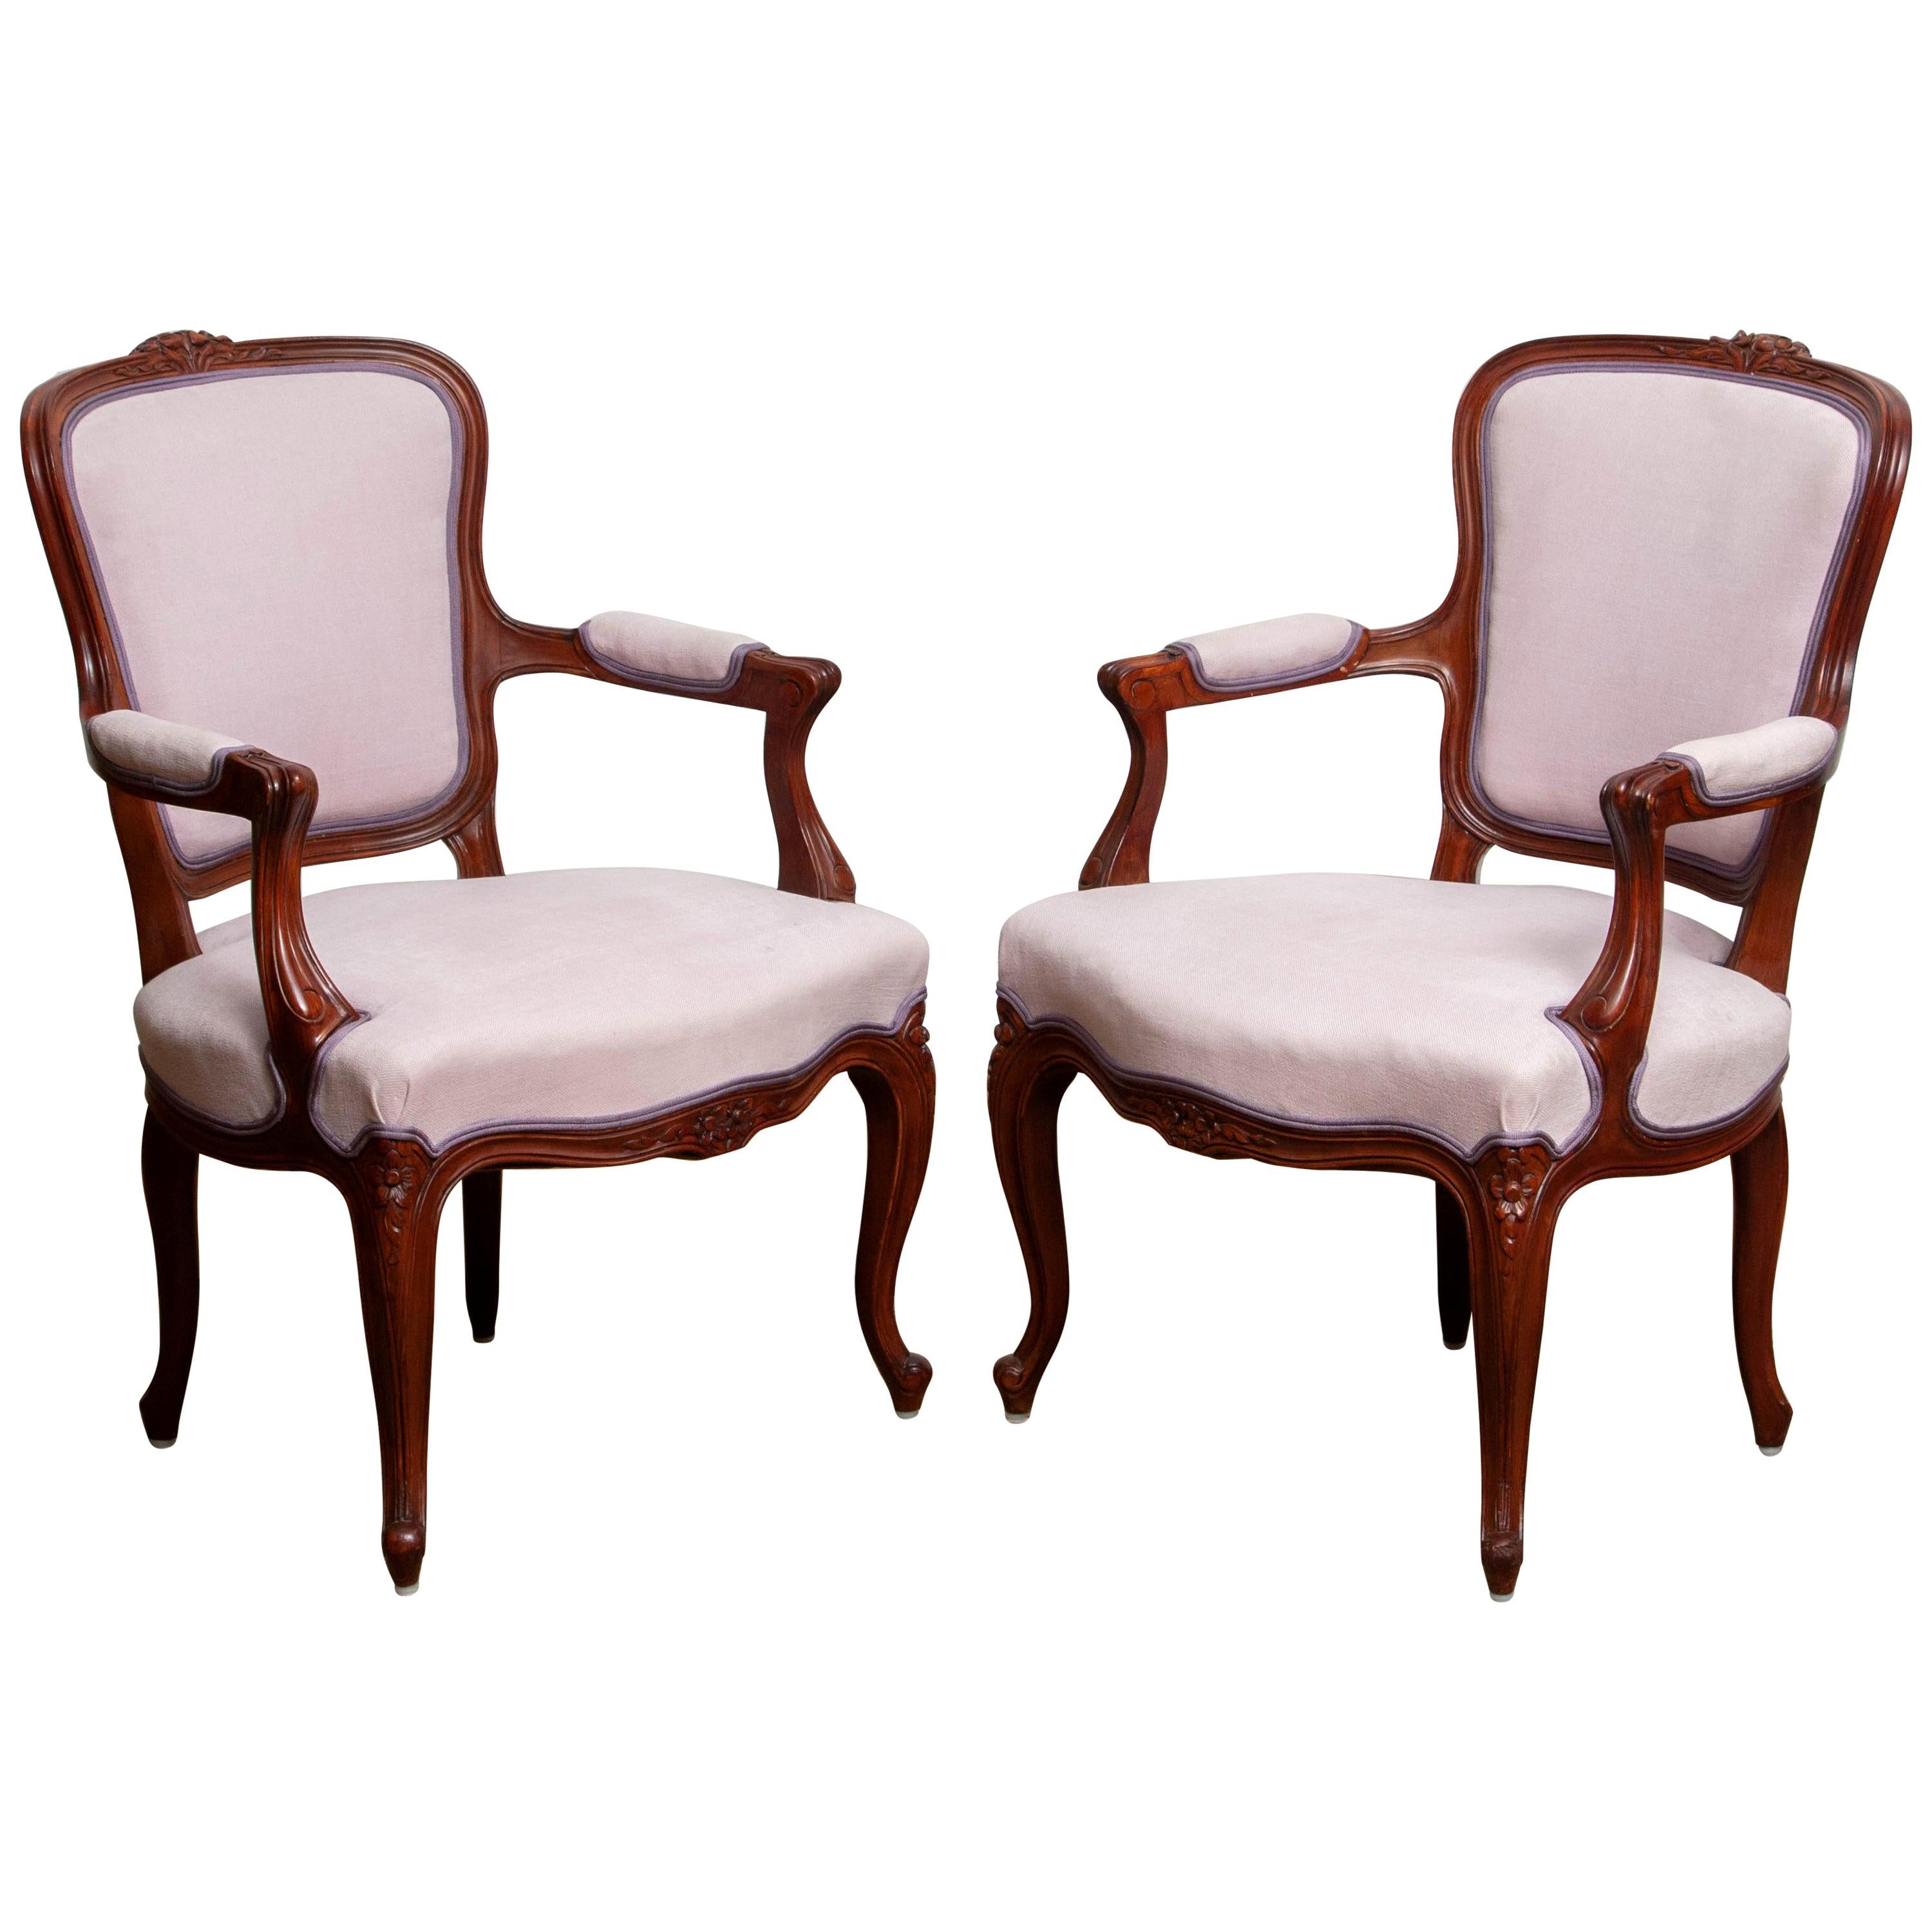 Mid-20th Century 1950s Pair of Pink Swedish Rococo Bergère in the Shabby Chic Technique Chairs F